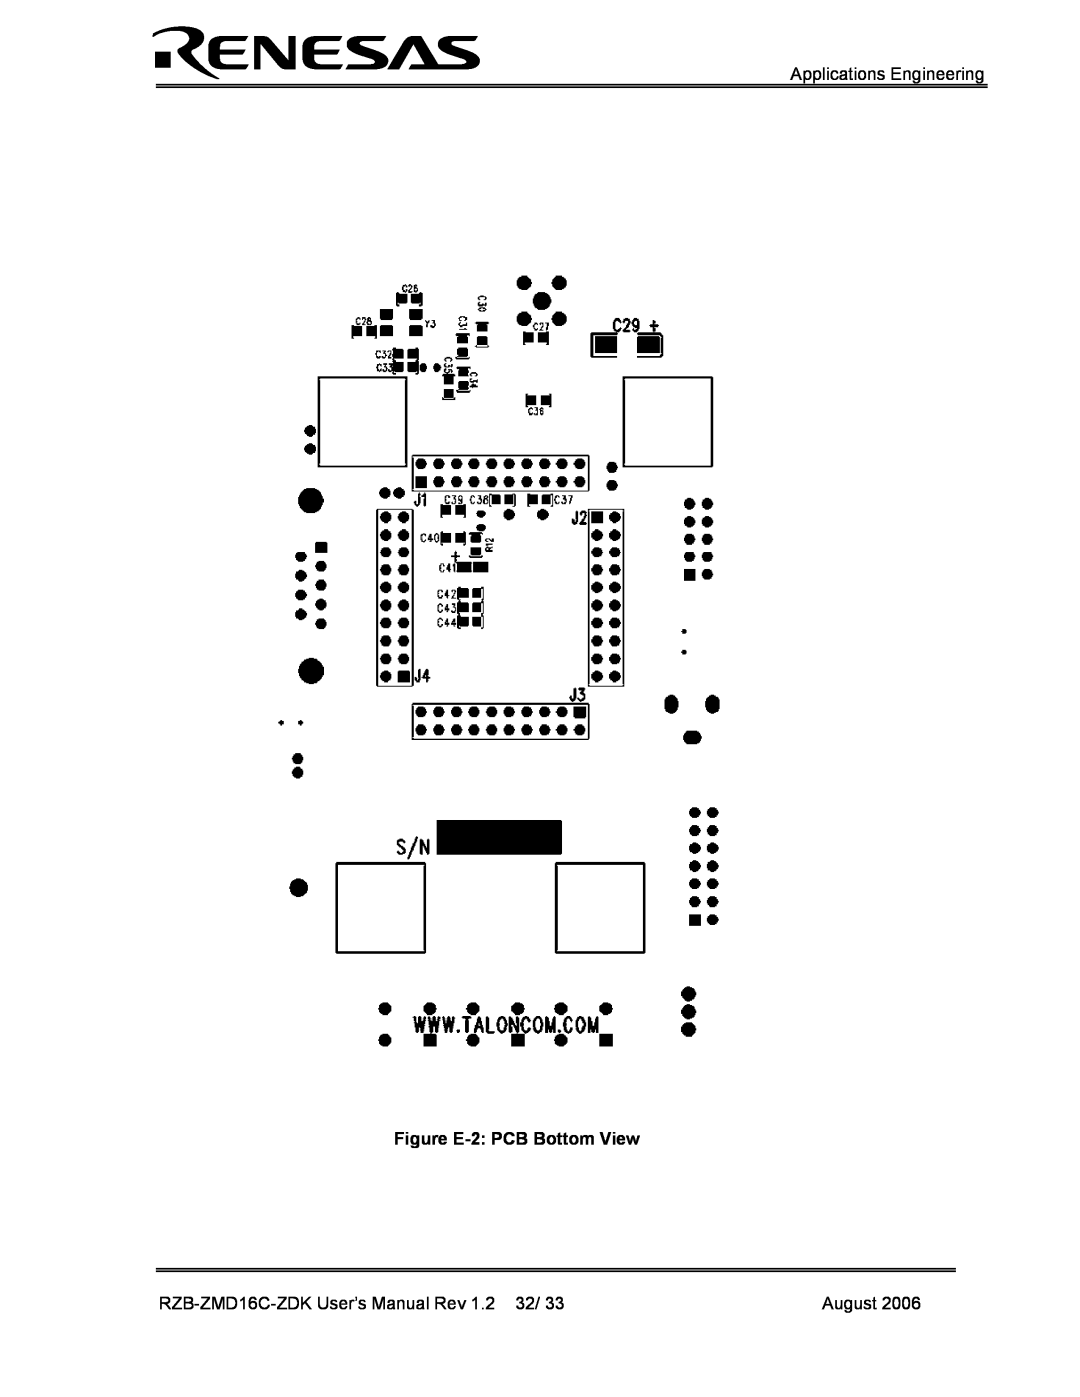 Renesas RZB-ZMD16C-ZDK user manual Applications Engineering, Figure E-2 PCB Bottom View, August 